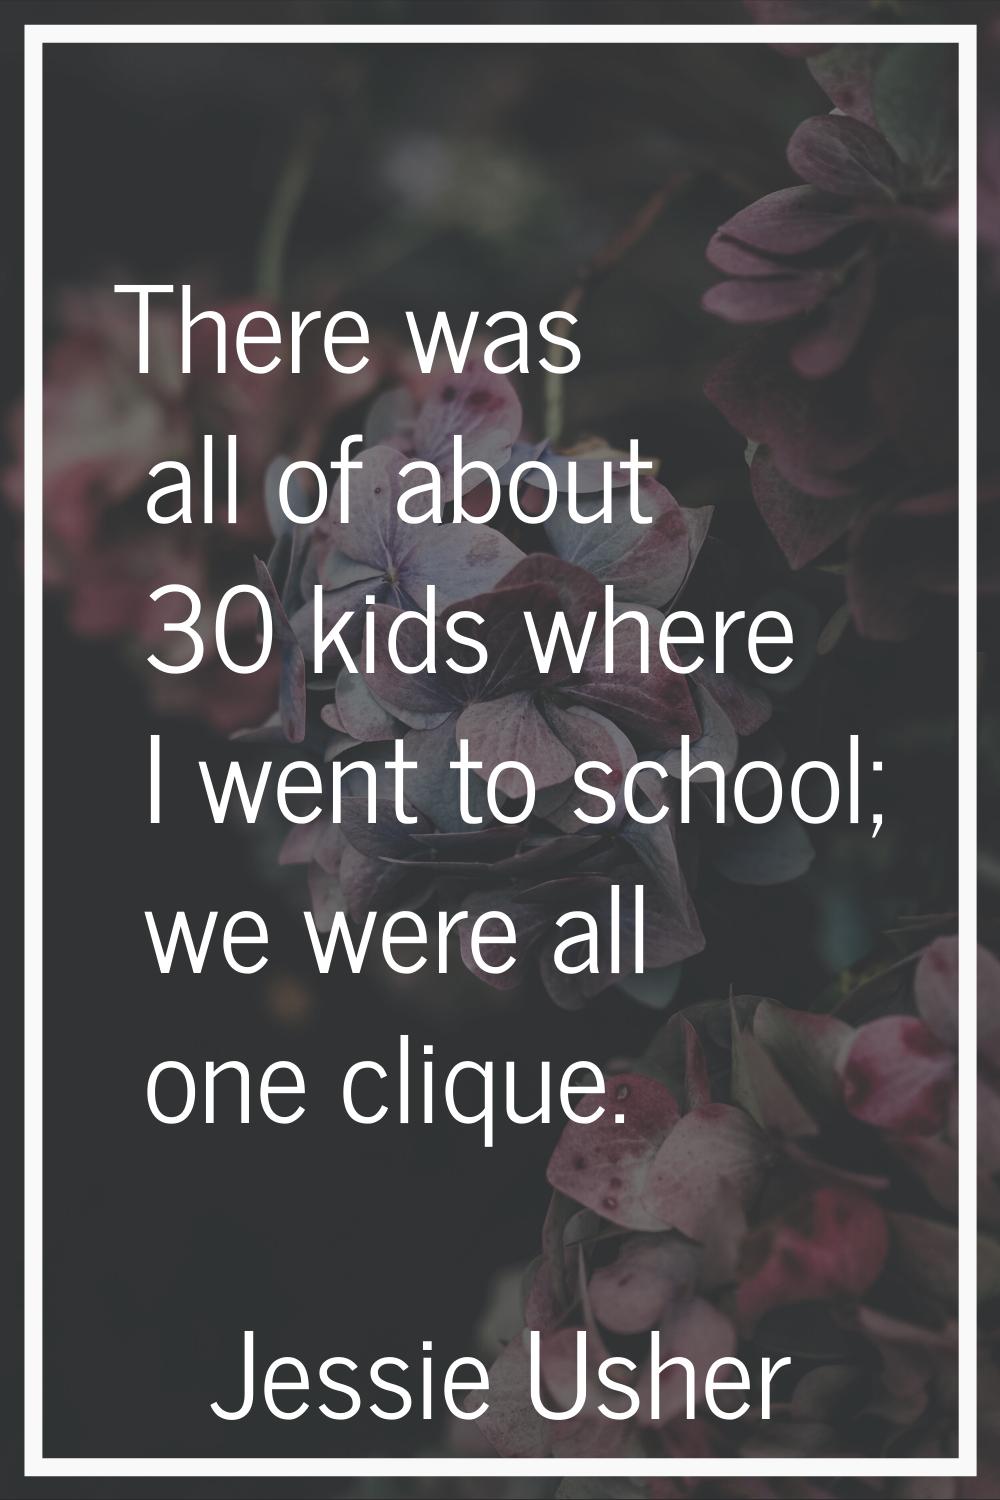 There was all of about 30 kids where I went to school; we were all one clique.